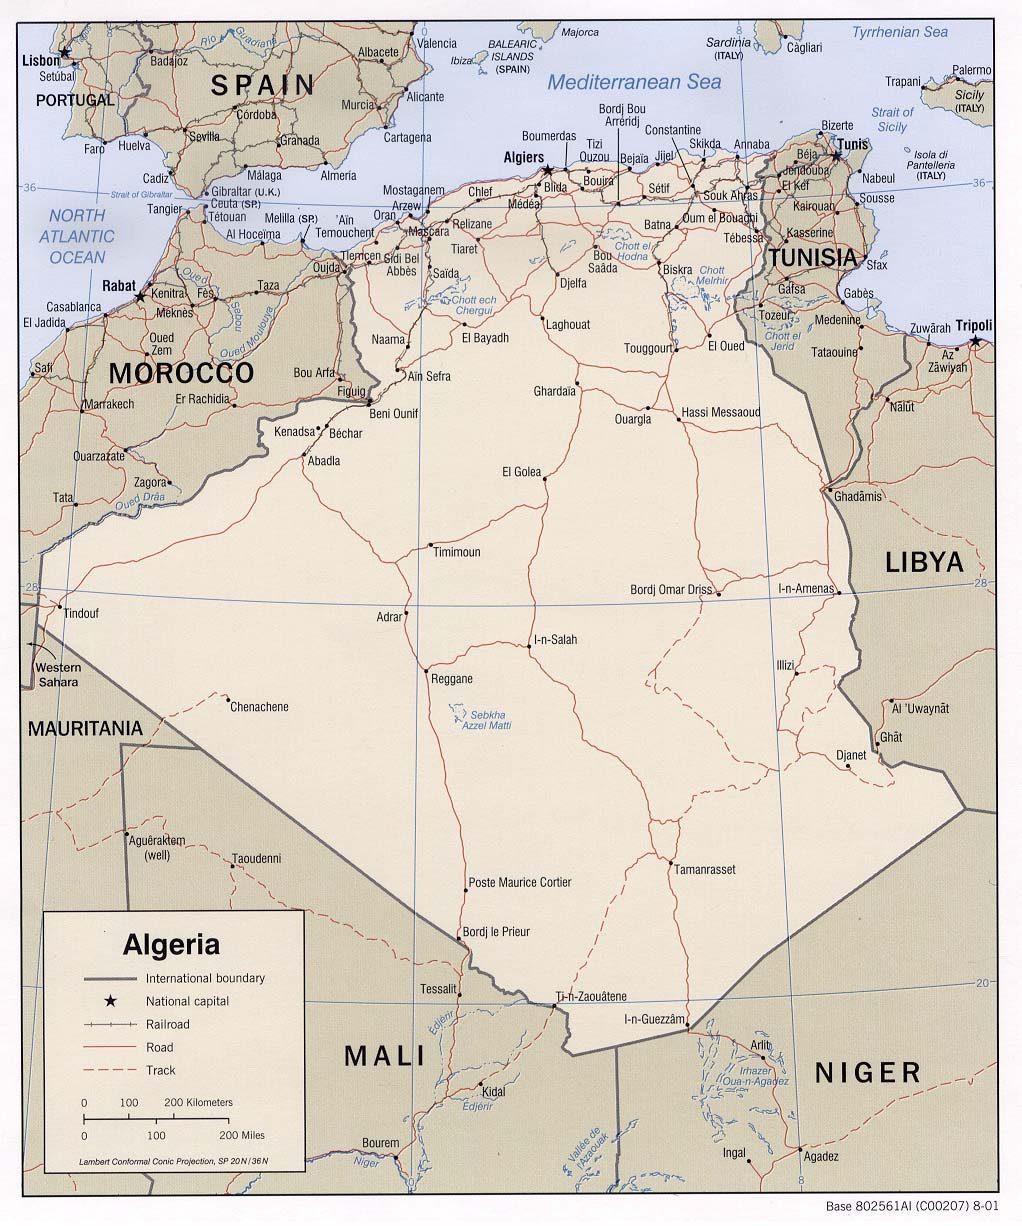 Algeria Maps - Perry-Castañeda Map Collection - UT Library Online